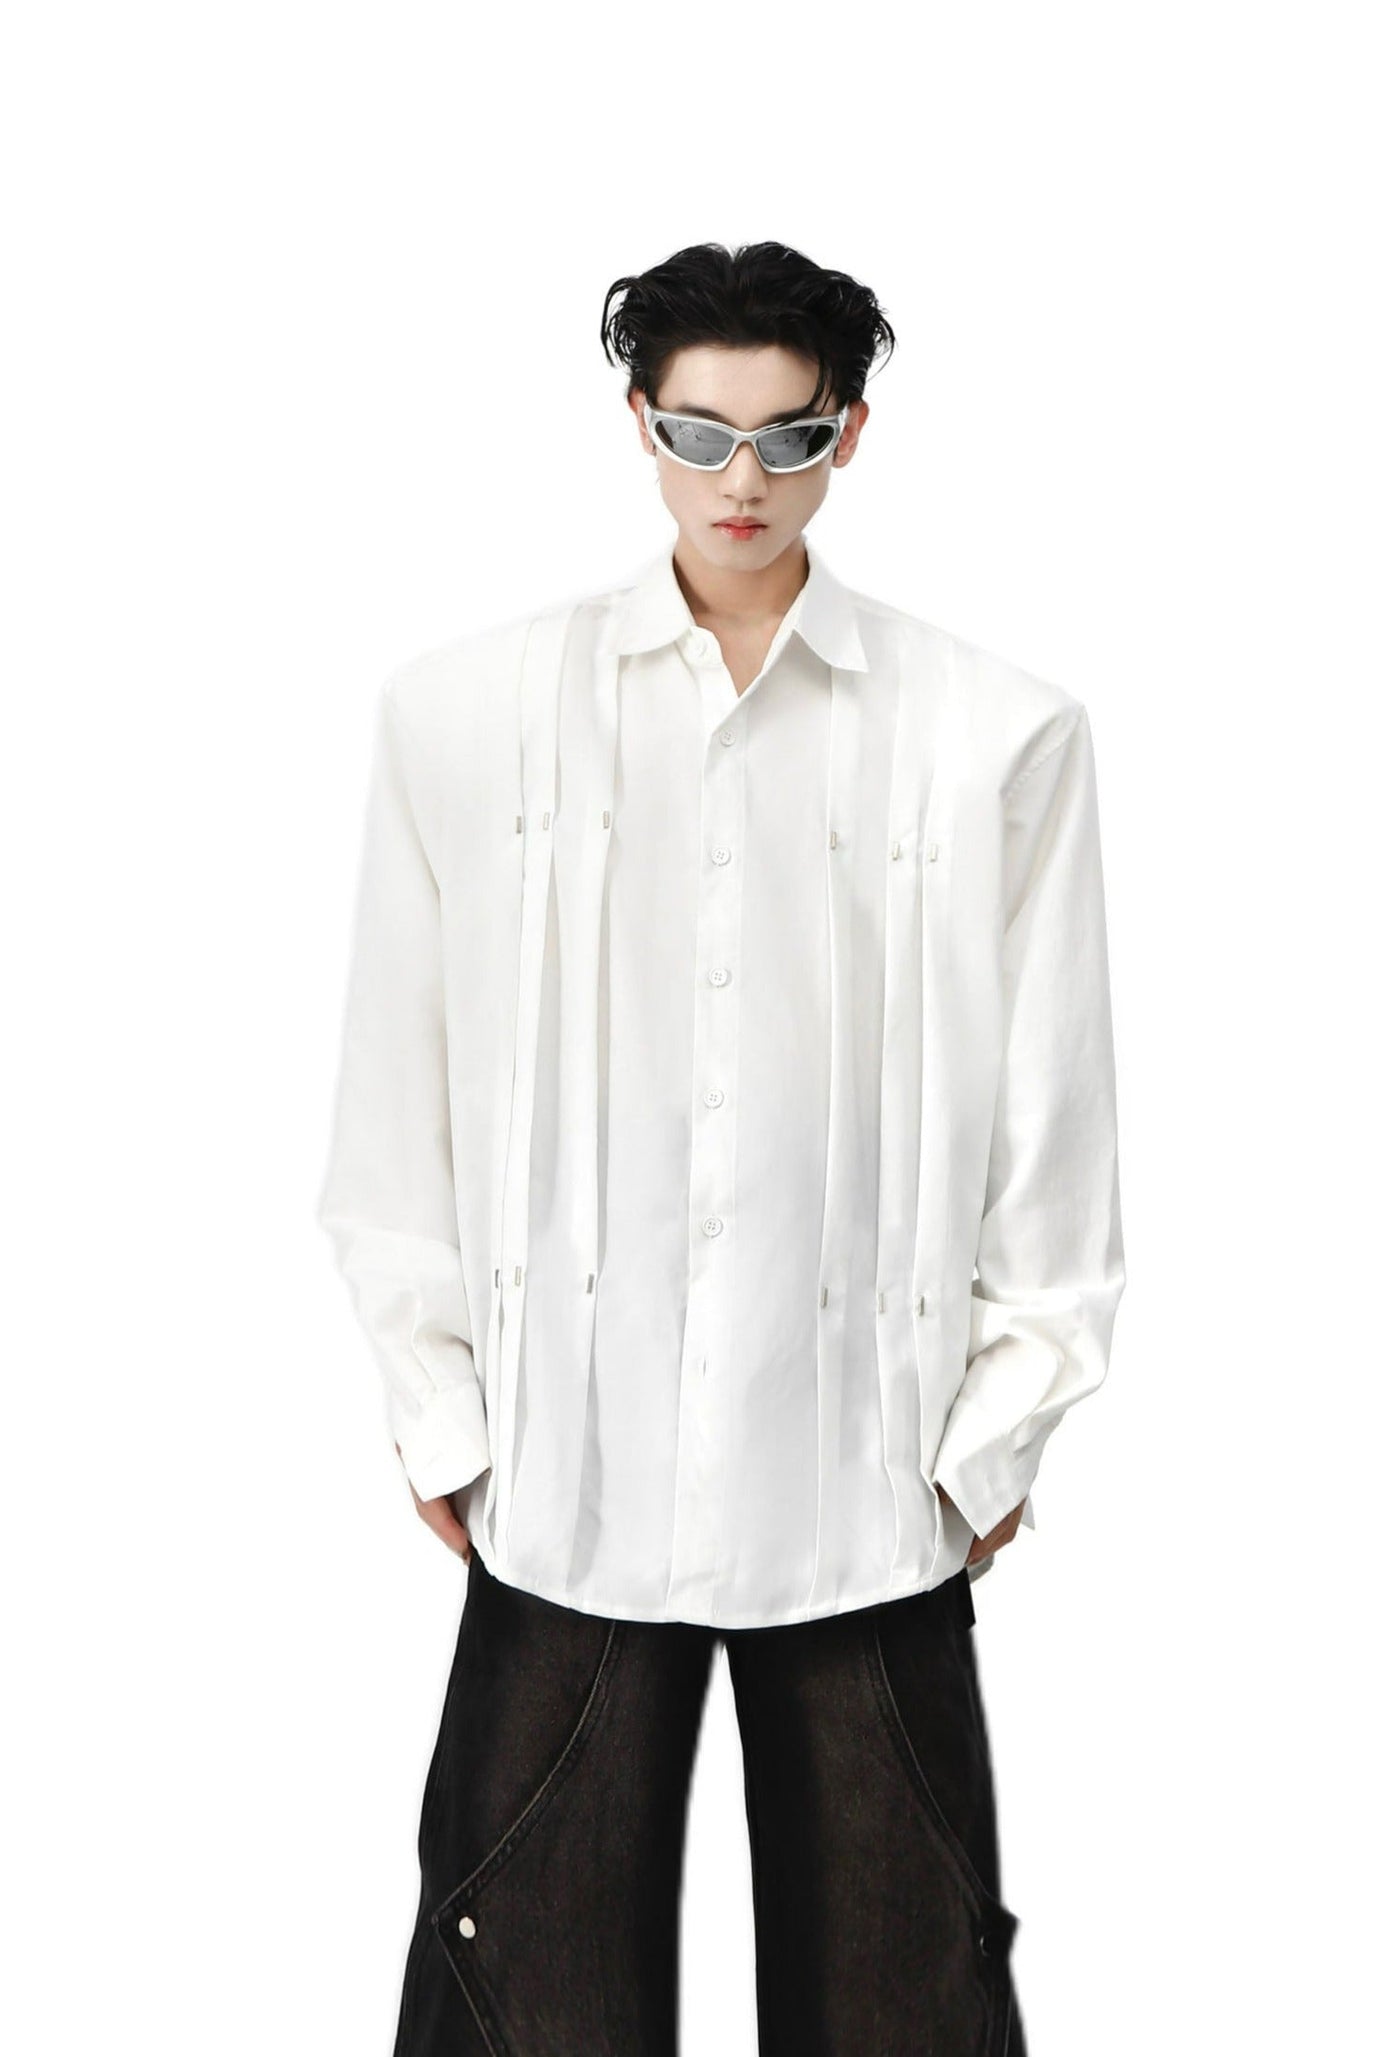 Metal Pleated Long Sleeve Shirt Korean Street Fashion Shirt By Argue Culture Shop Online at OH Vault